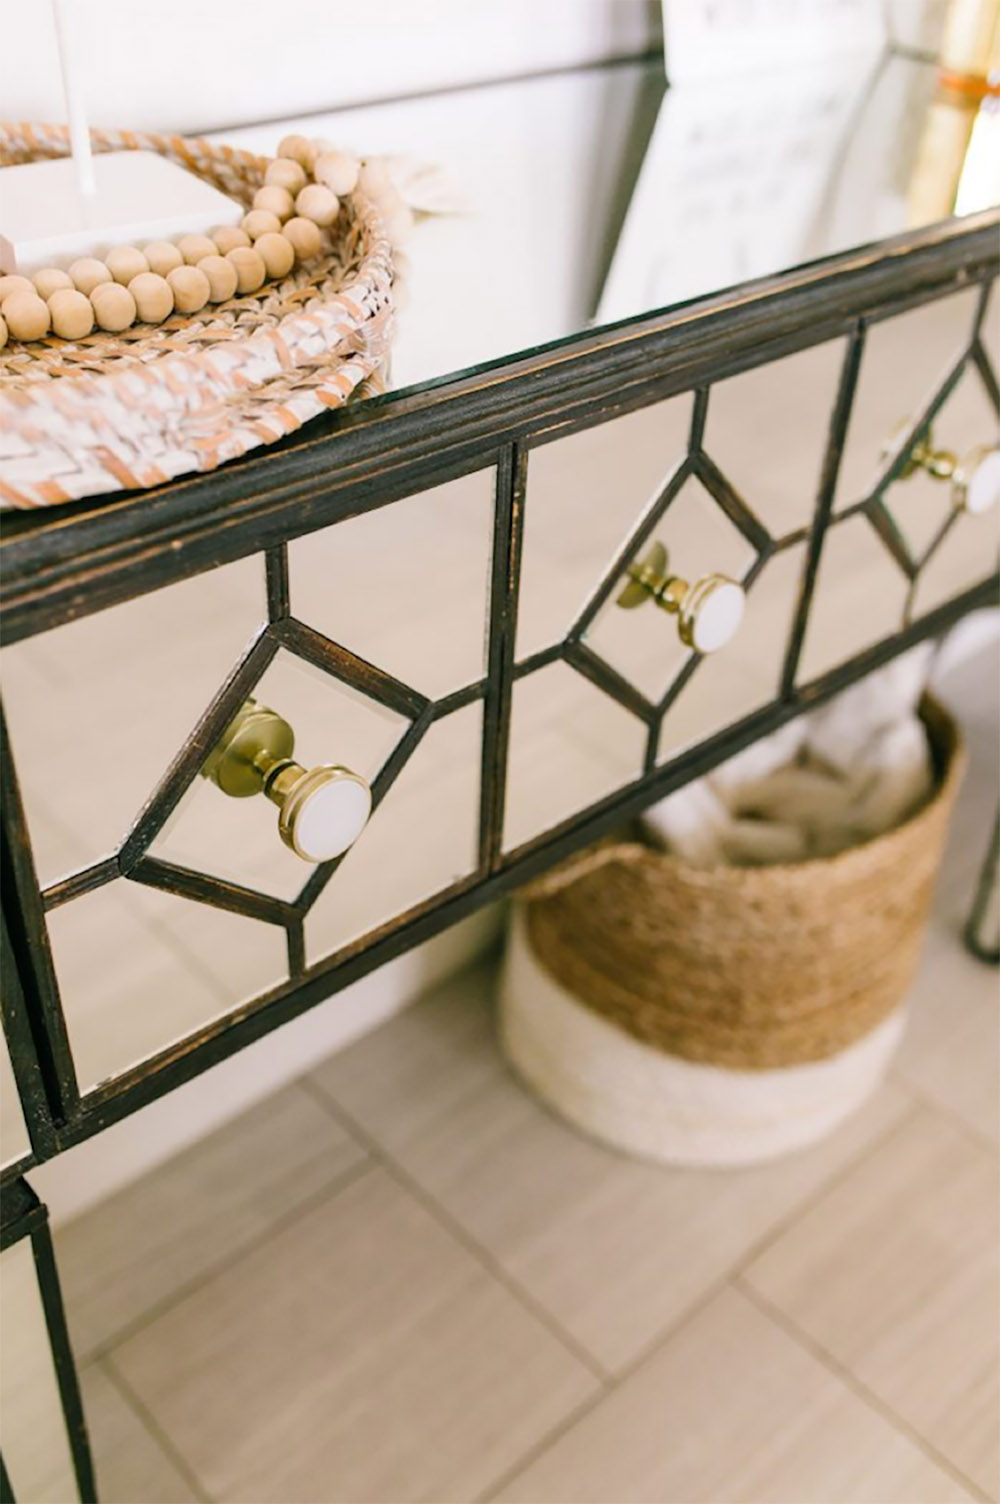 A natural jute decorative storage basket sitting under a mirrored console table.